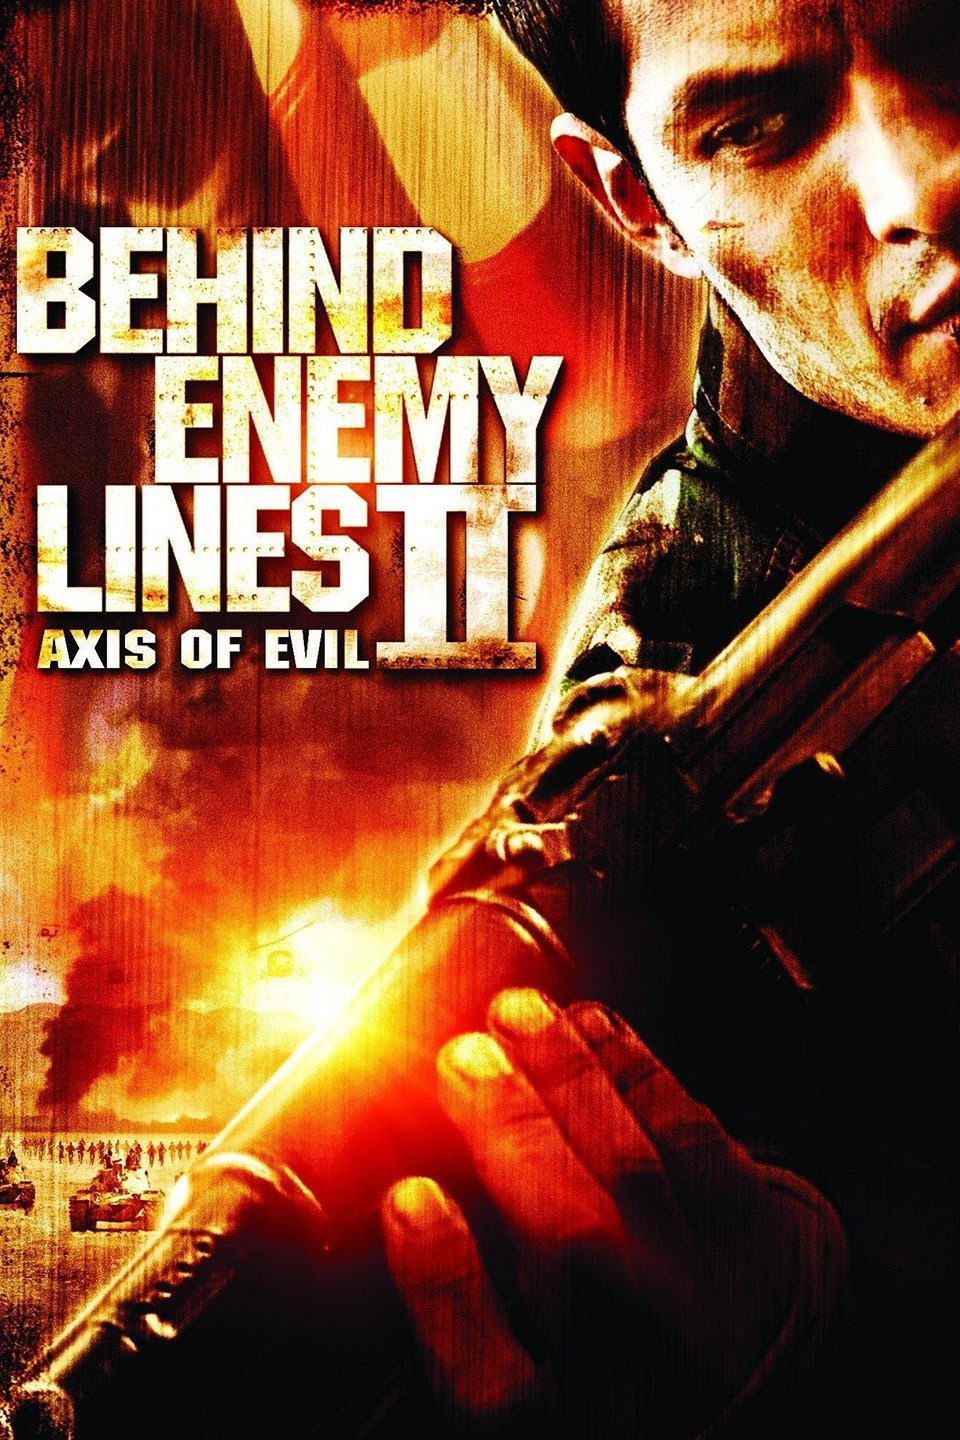 Download Behind Enemy Lines II: Axis of Evil (2006) BluRay 480p | 720p